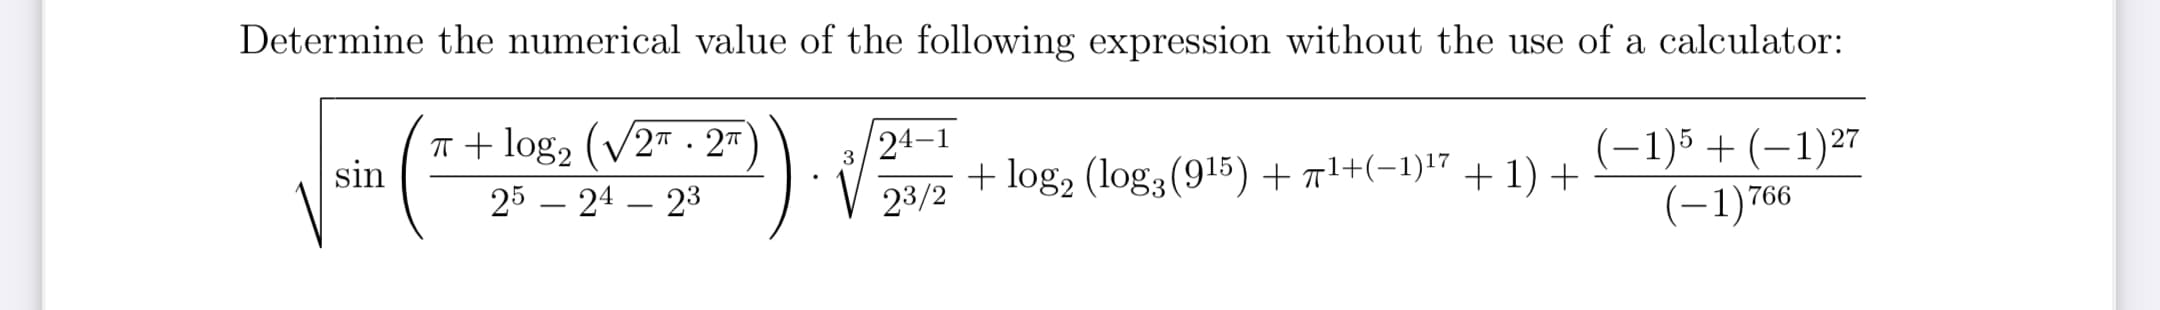 Determine the numerical value of the following expression without the use of a calculator:
T + log, (V2" - 2™
sin
24-1
+ log, (log3(915)+ n1+(-1)7 + 1)+
(-1)5 + (–1)27
(-1)766
25 – 24 – 23
23/2
